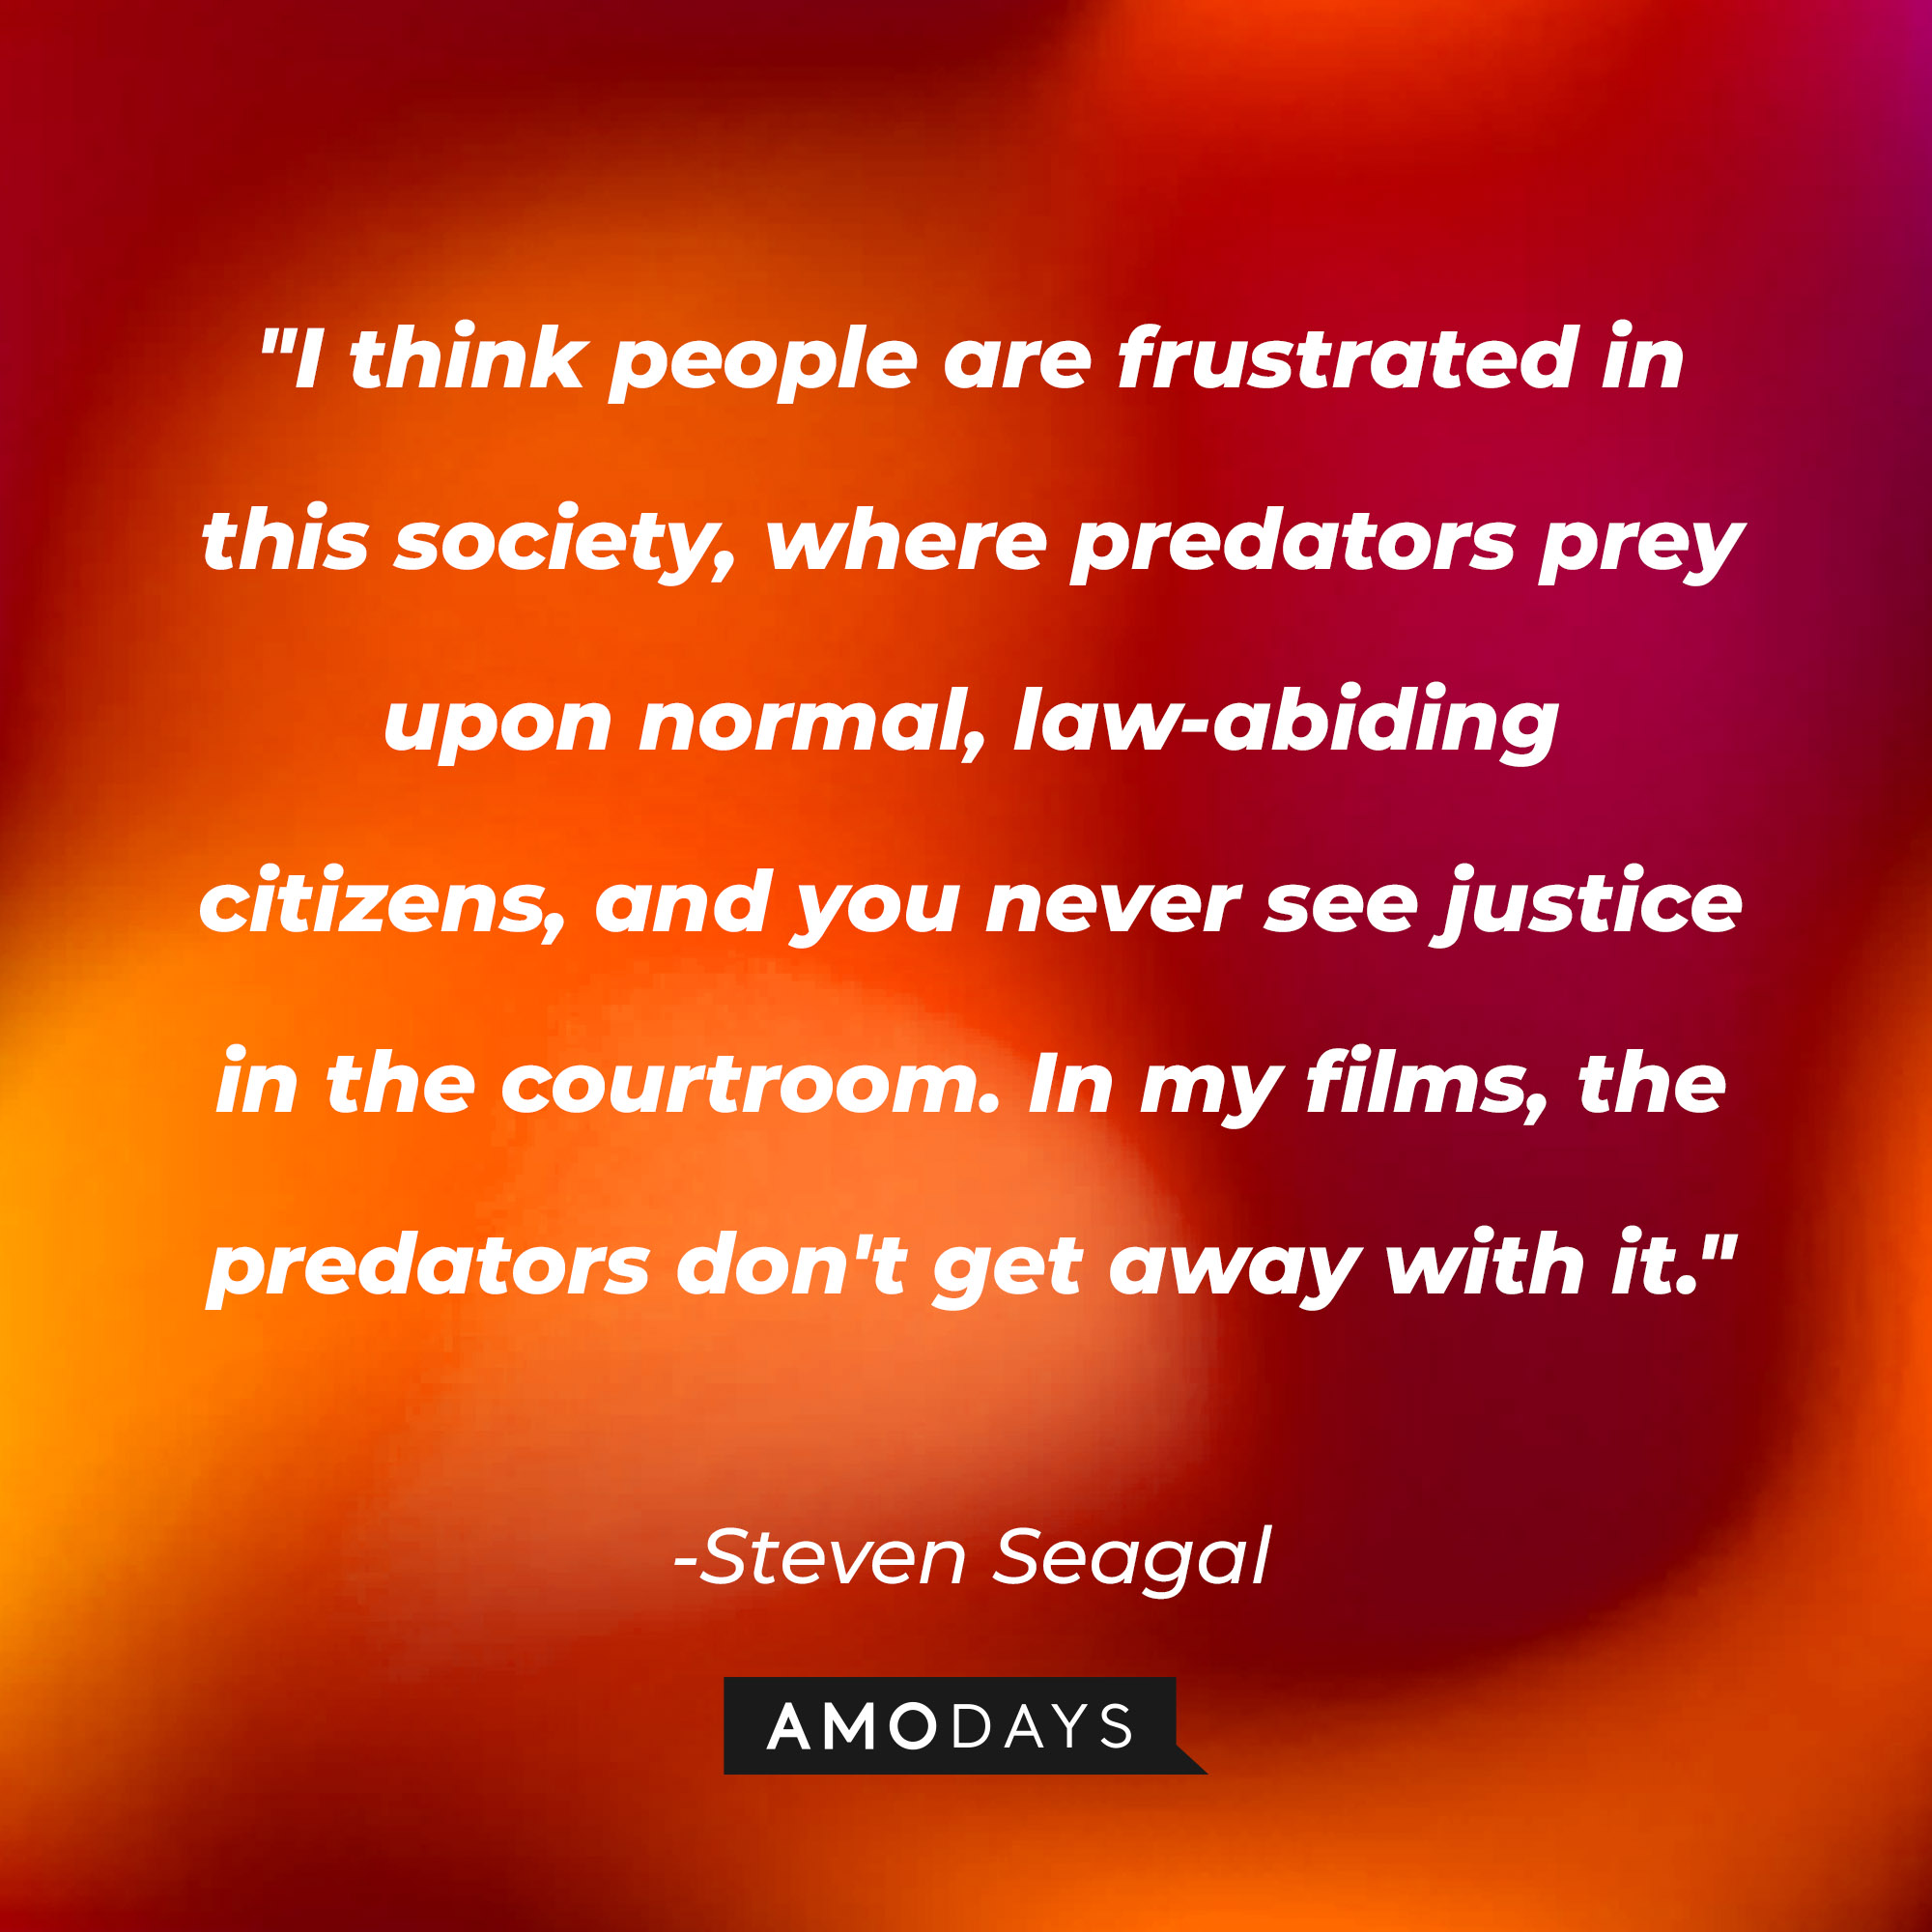 Steven Seagal’s quote: "I think people are frustrated in this society, where predators prey upon normal, law-abiding citizens, and you never see justice in the courtroom. In my films, the predators don't get away with it." | Image: AmoDays